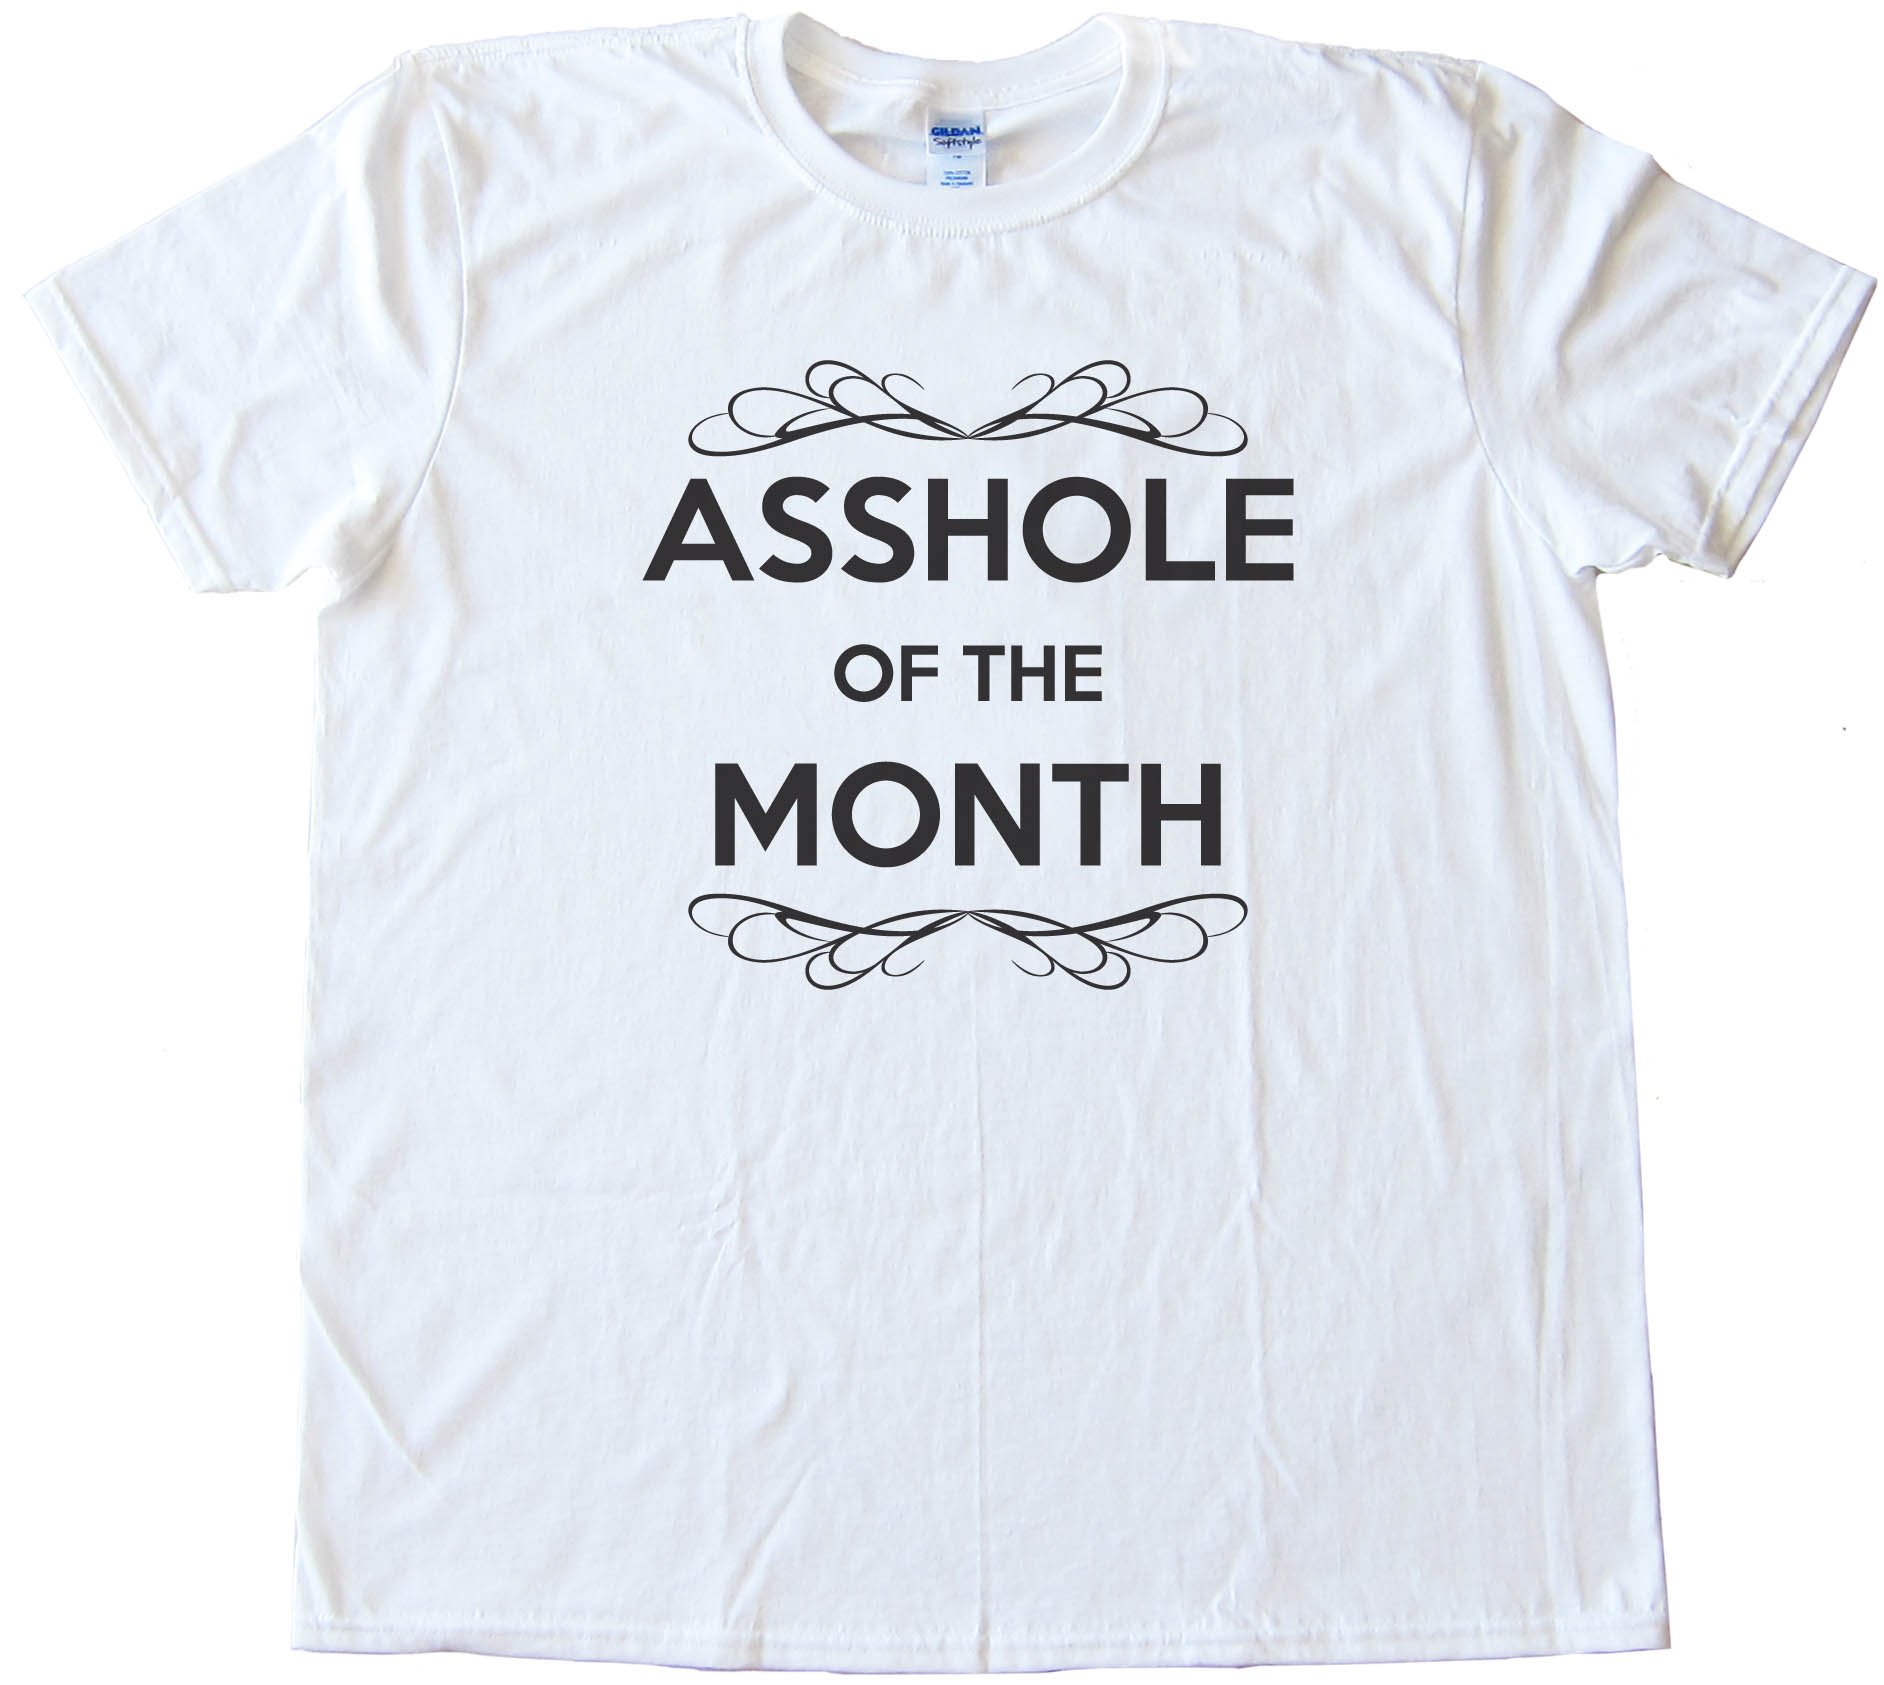 Asshole Of The Month - Tee Shirt